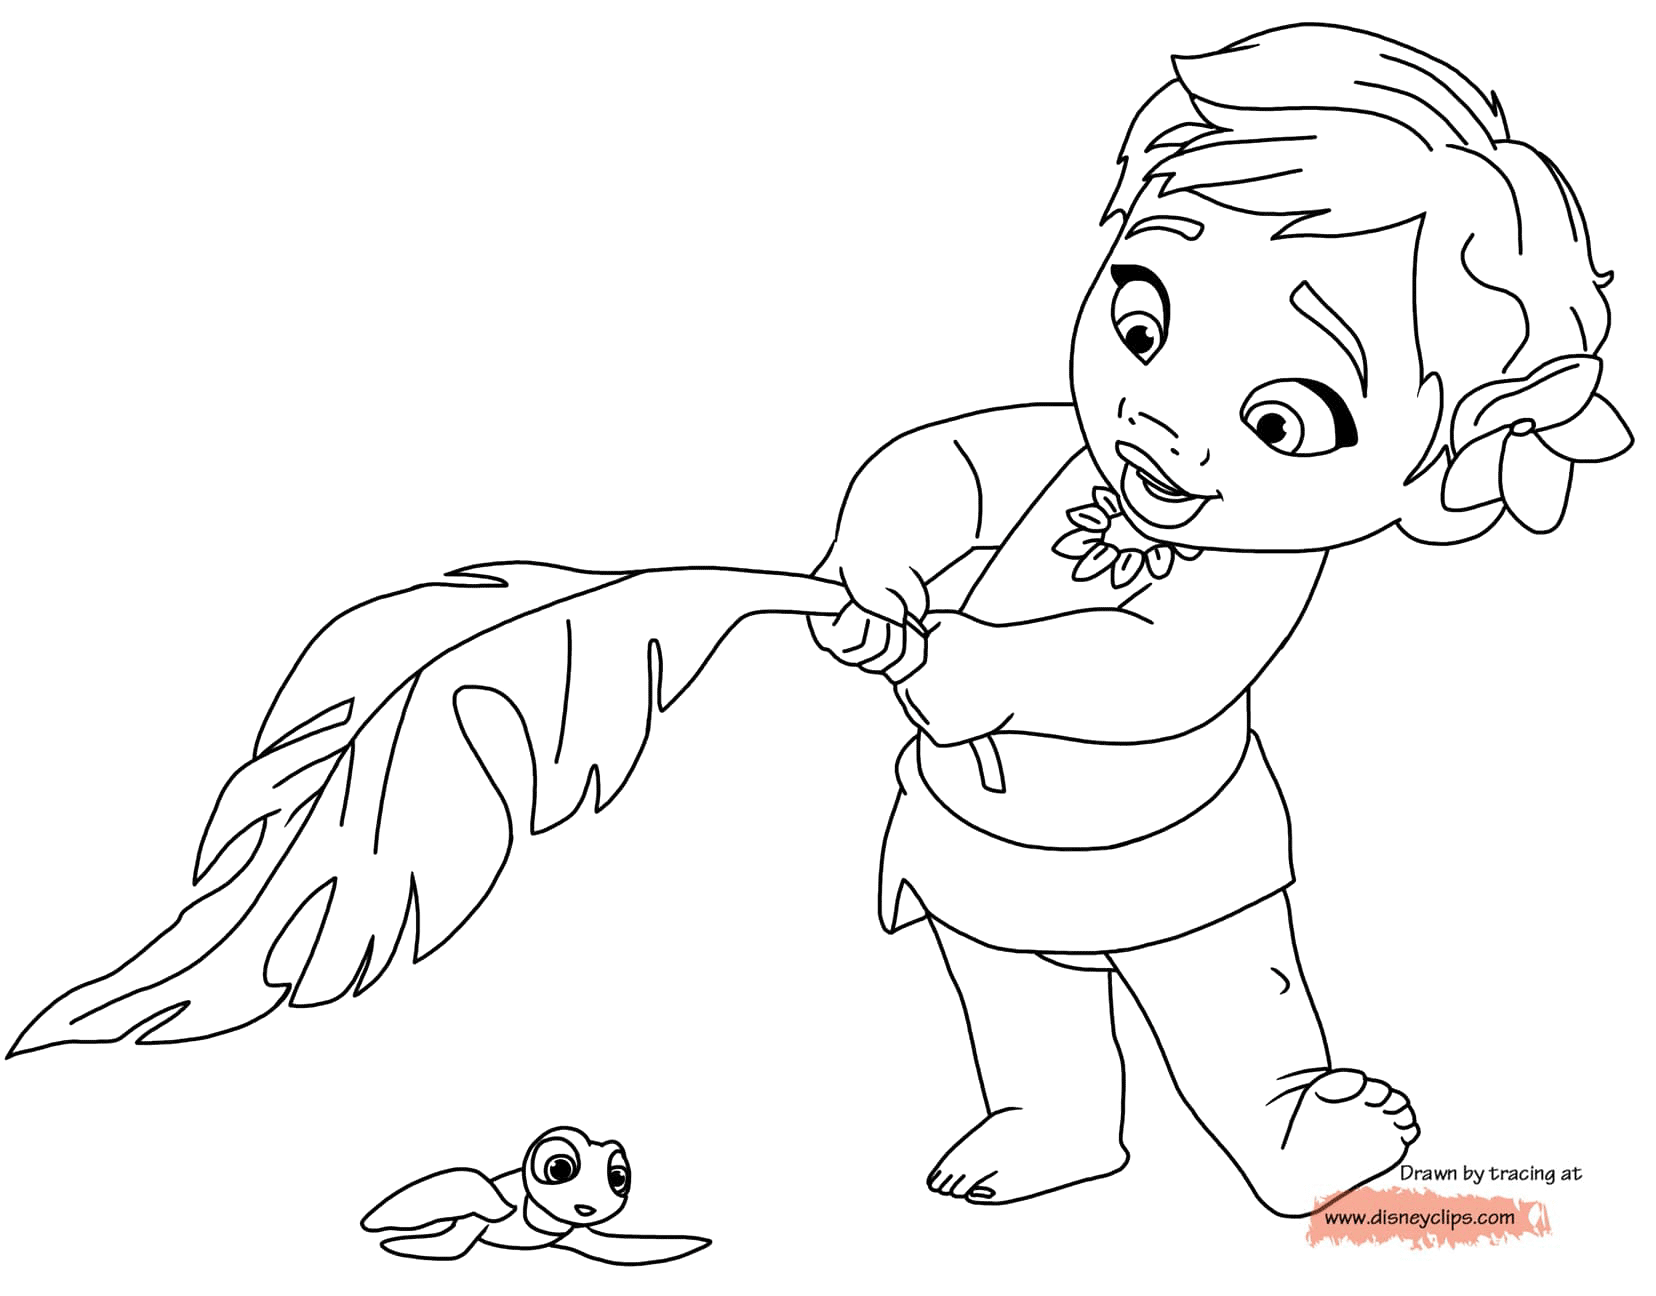 coloring book pages moana disney39s moana coloring pages disneyclipscom book pages moana coloring 